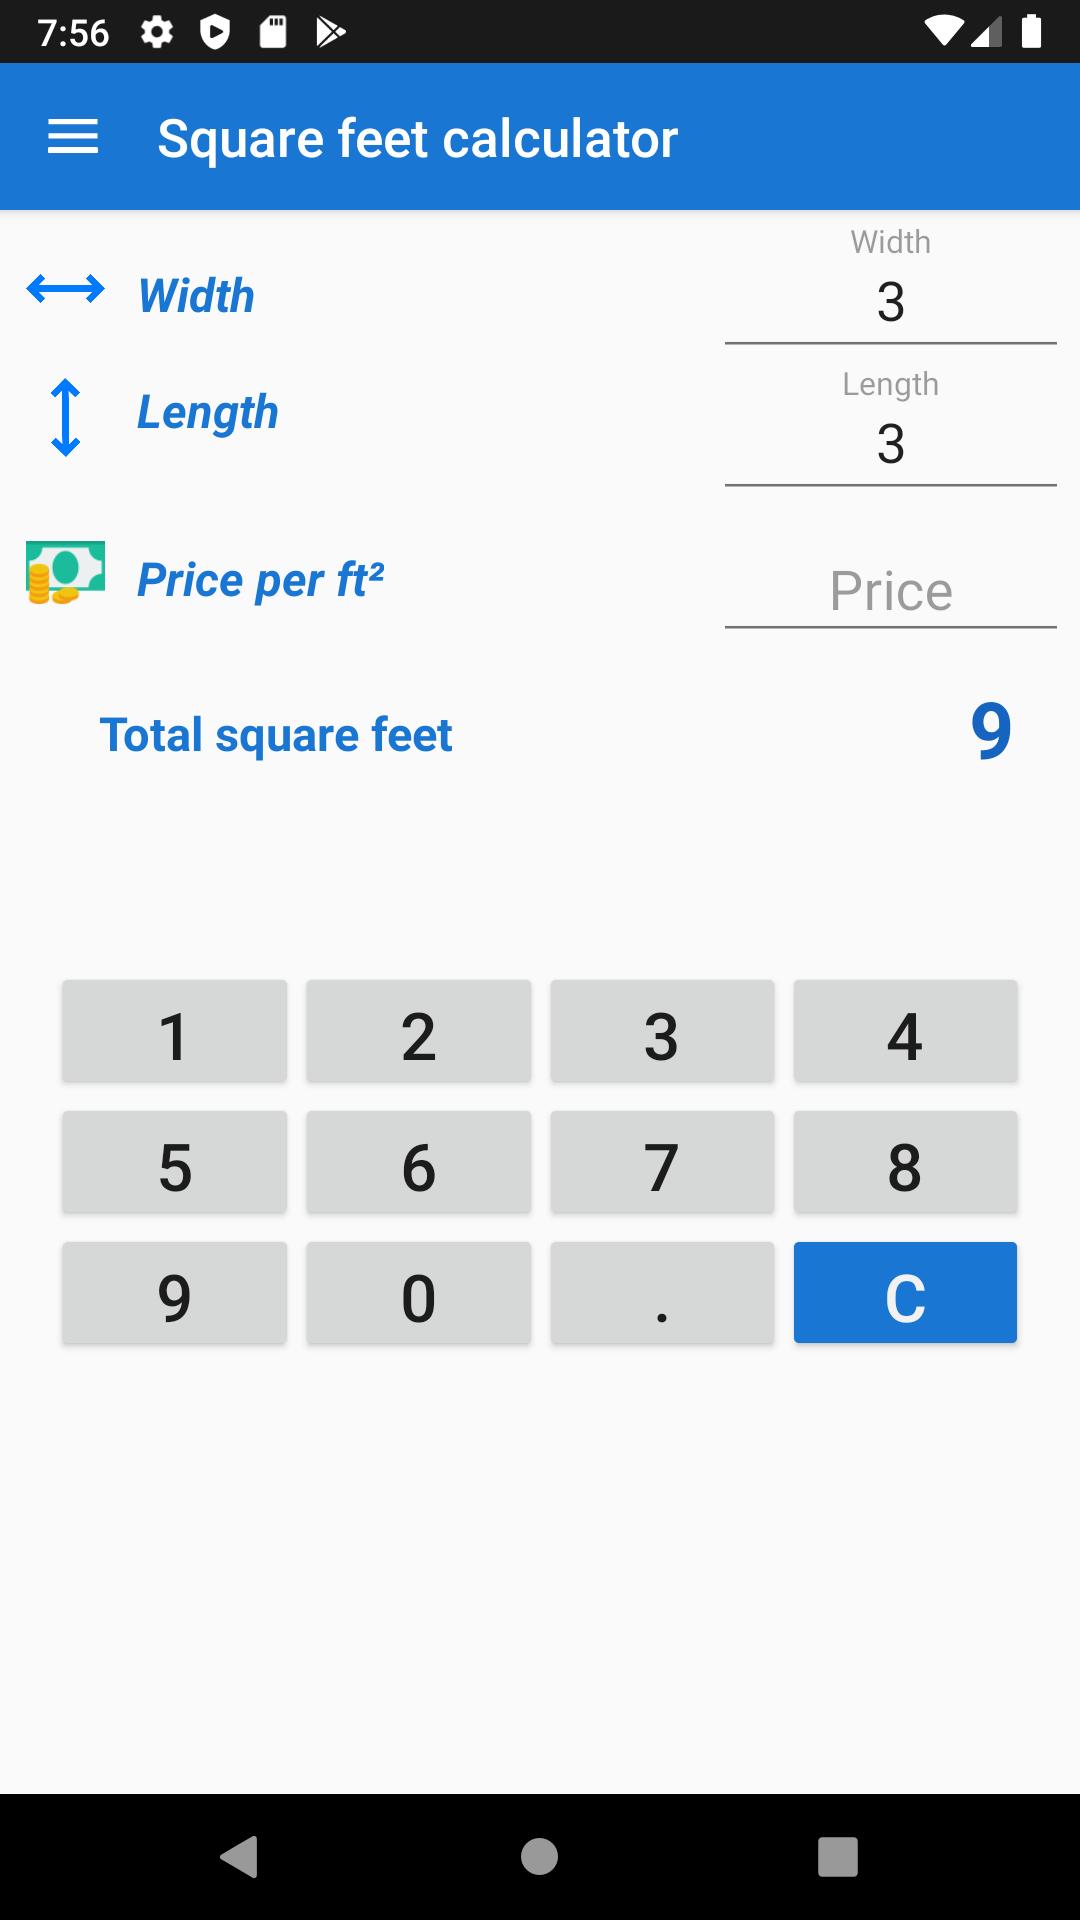 Square feet calculator for Android - APK Download